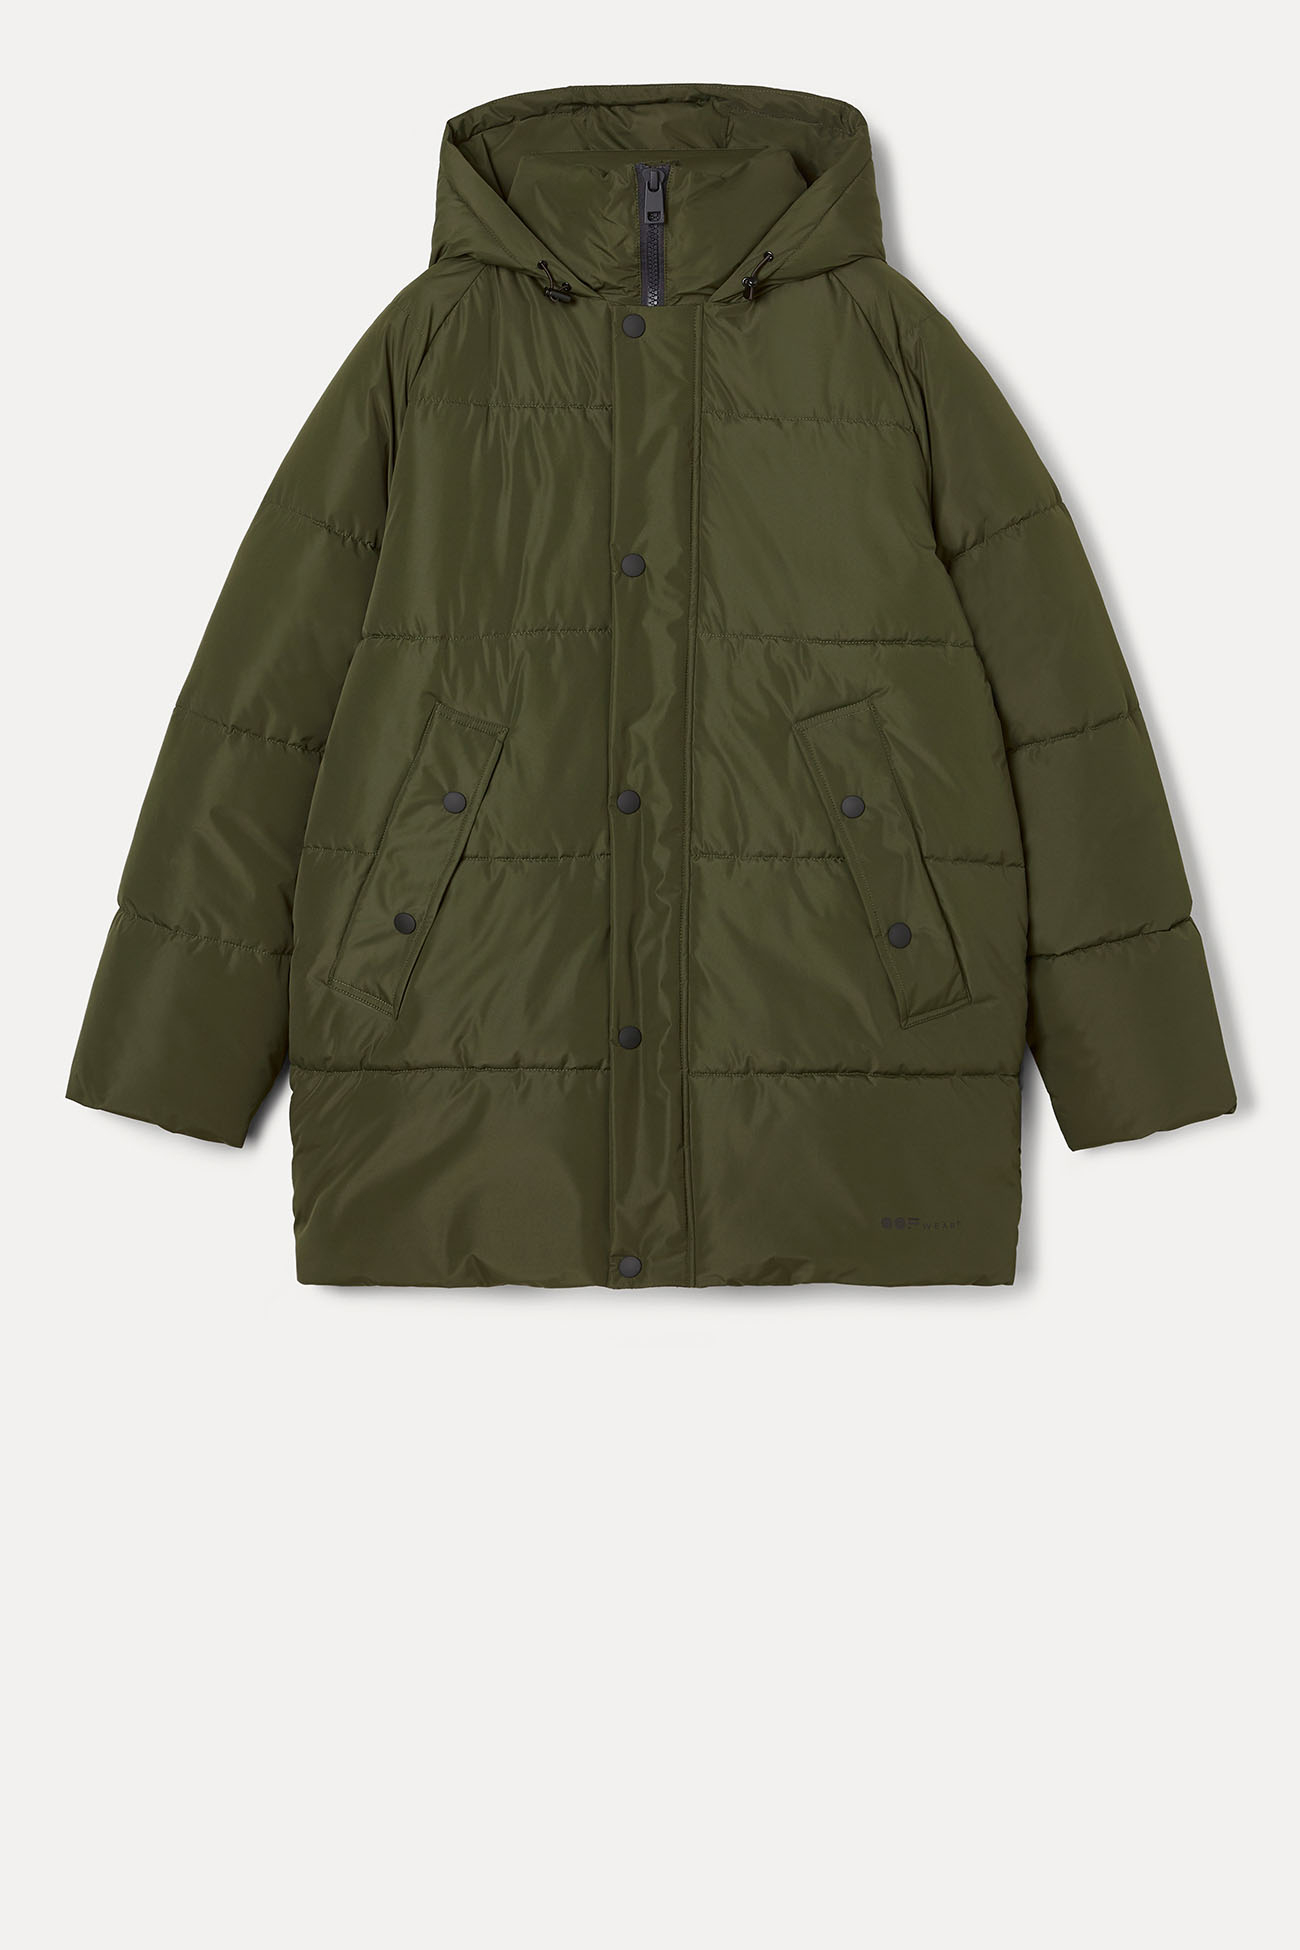 JACKET 5989 MADE IN WATER RESISTANT NYLON - MOSS GREEN - OOF WEAR